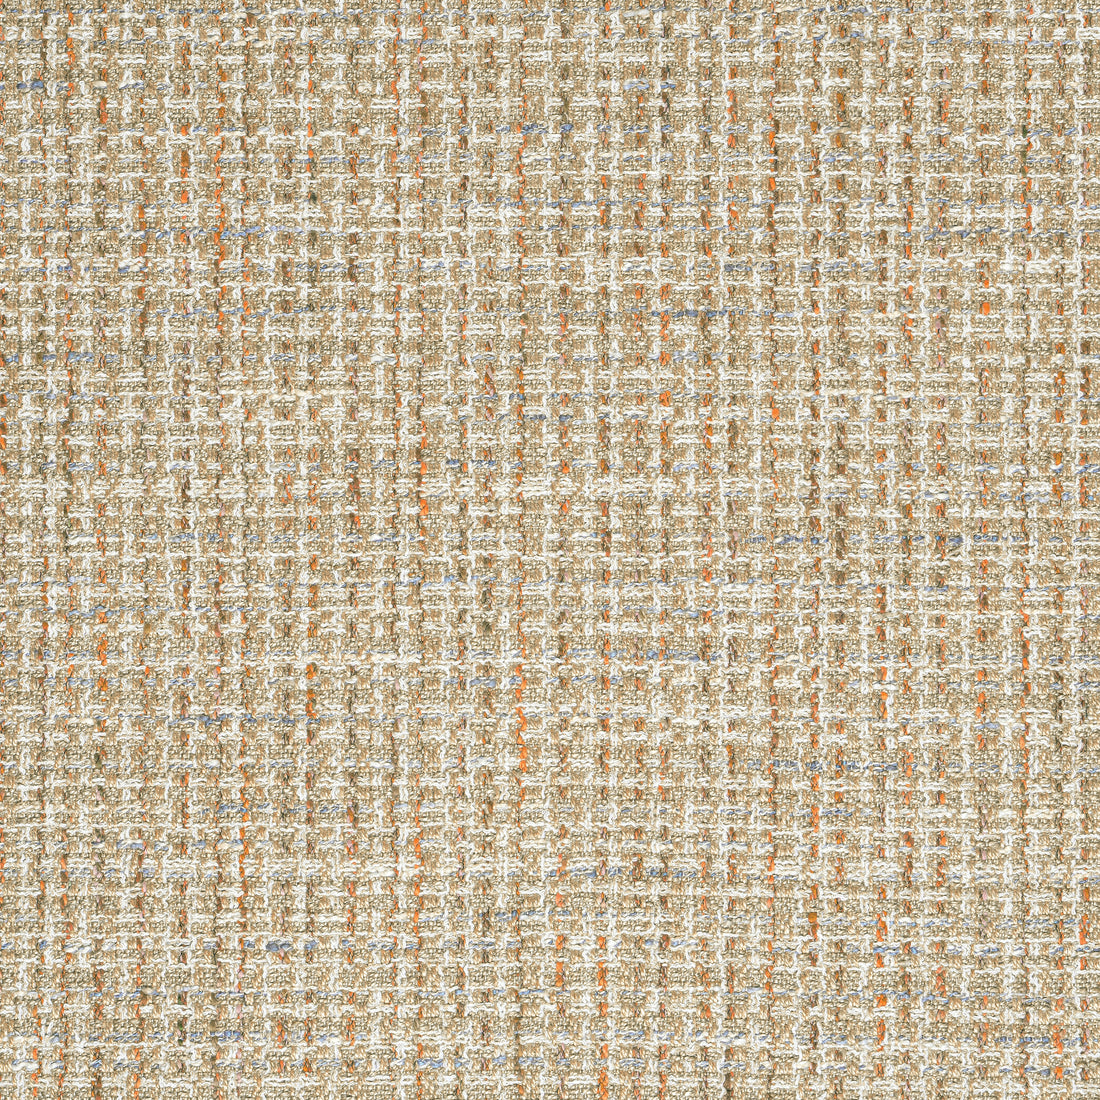 Emilio fabric in cashmere color - pattern number W80953 - by Thibaut in the Dunmore collection